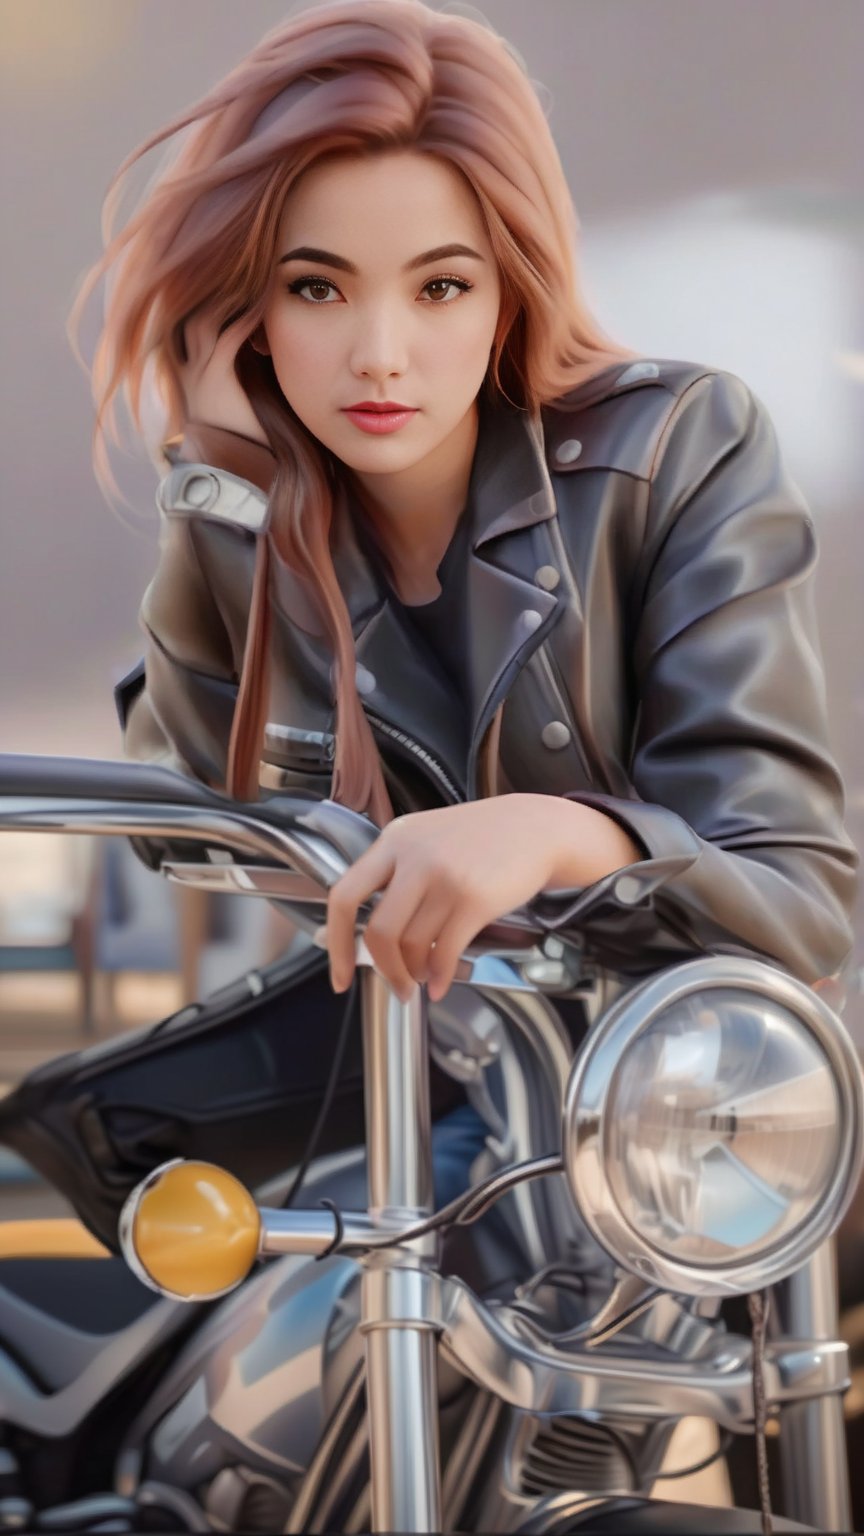 A woman sits confidently astride a gleaming motorcycle, her leather-clad figure framed by the curves of the bike and the blurred background. Soft lighting casts a warm glow on her face, highlighting her determined expression as she gazes straight ahead. The vibrant colors of her jacket pop against the muted tones of the surrounding environment, creating a striking visual contrast. In the style of Guweiz, this photorealistic artwork masterfully blends realistic textures and subtle shading to bring the subject to life.